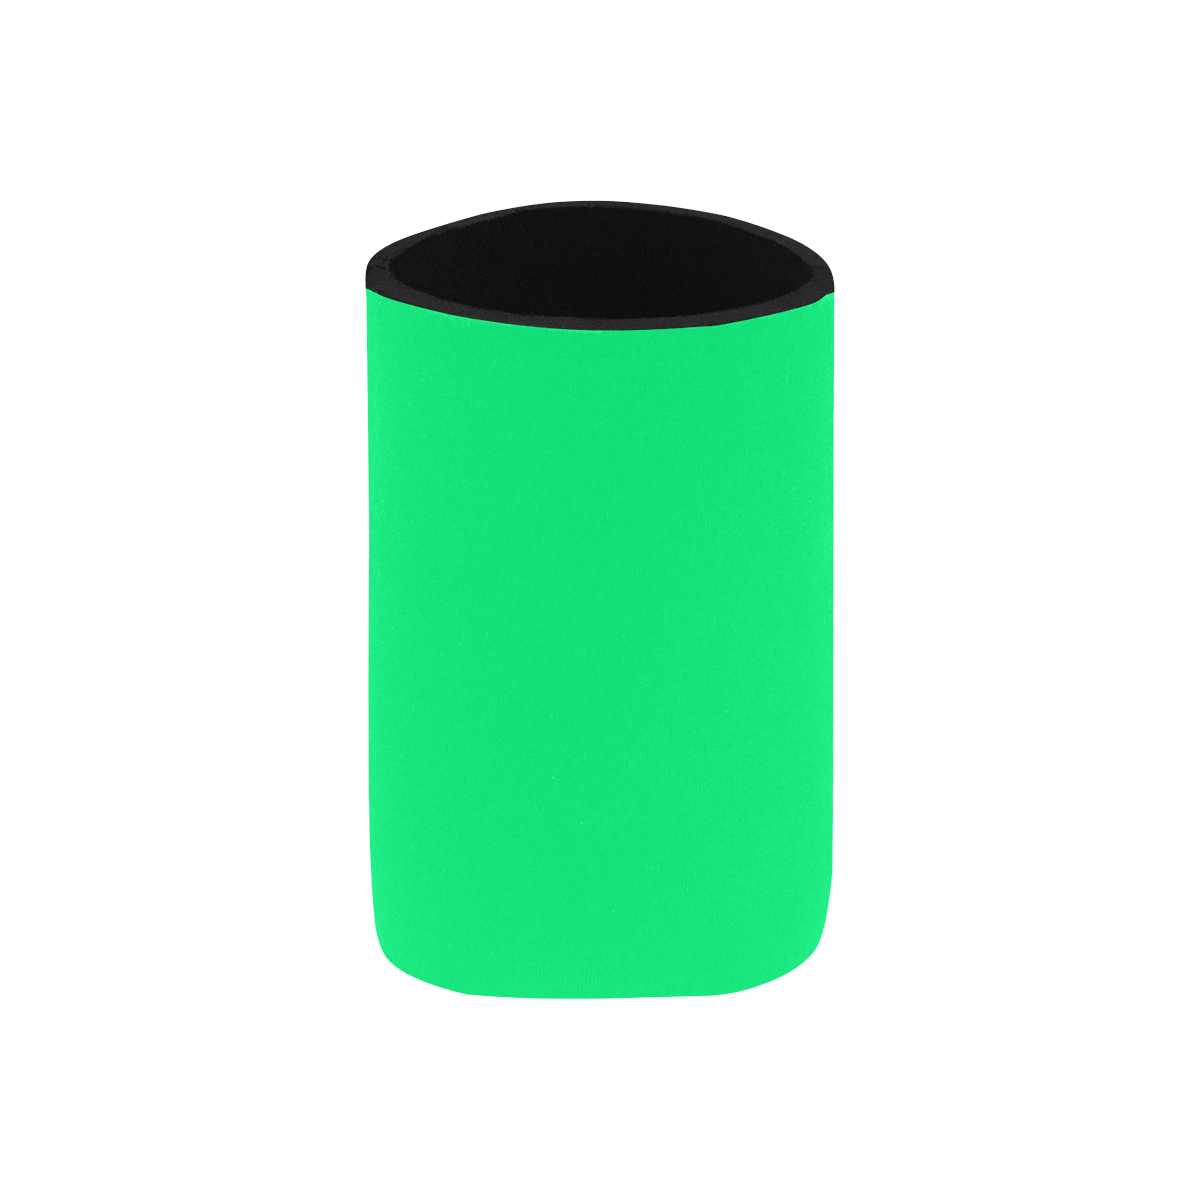 color spring green Neoprene Can Cooler 4" x 2.7" dia.